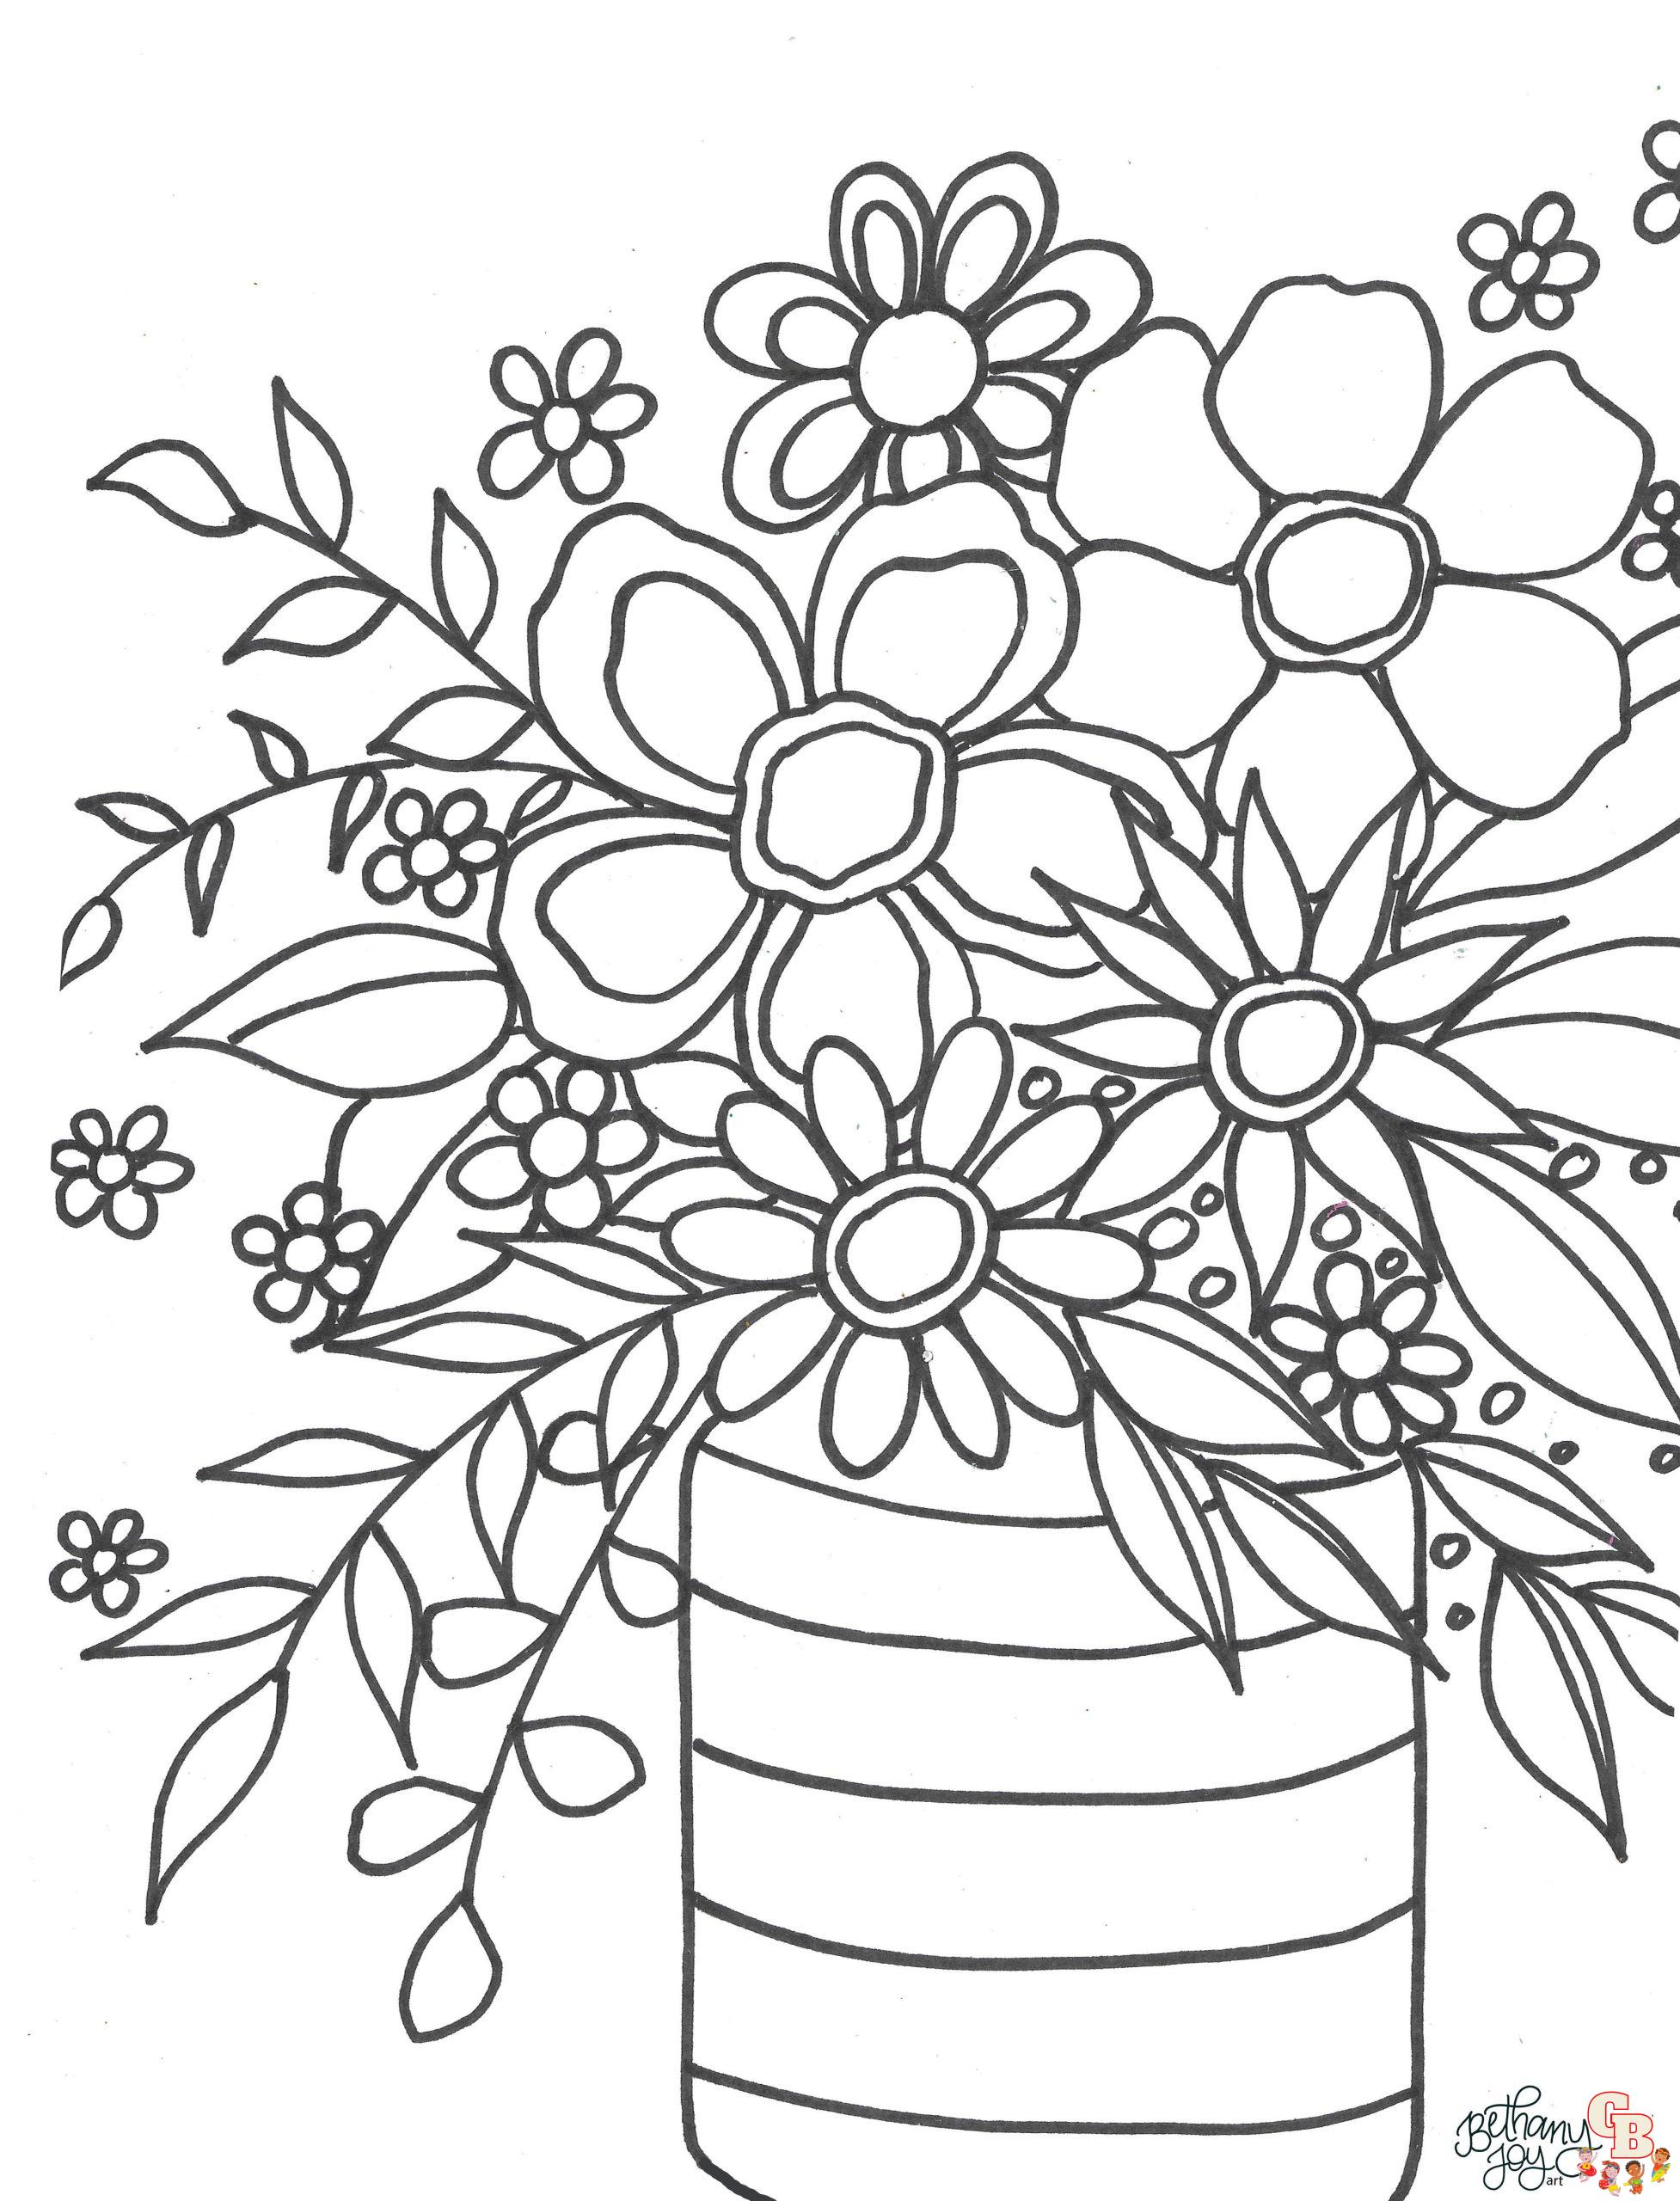 Digital Coloring Pages 3